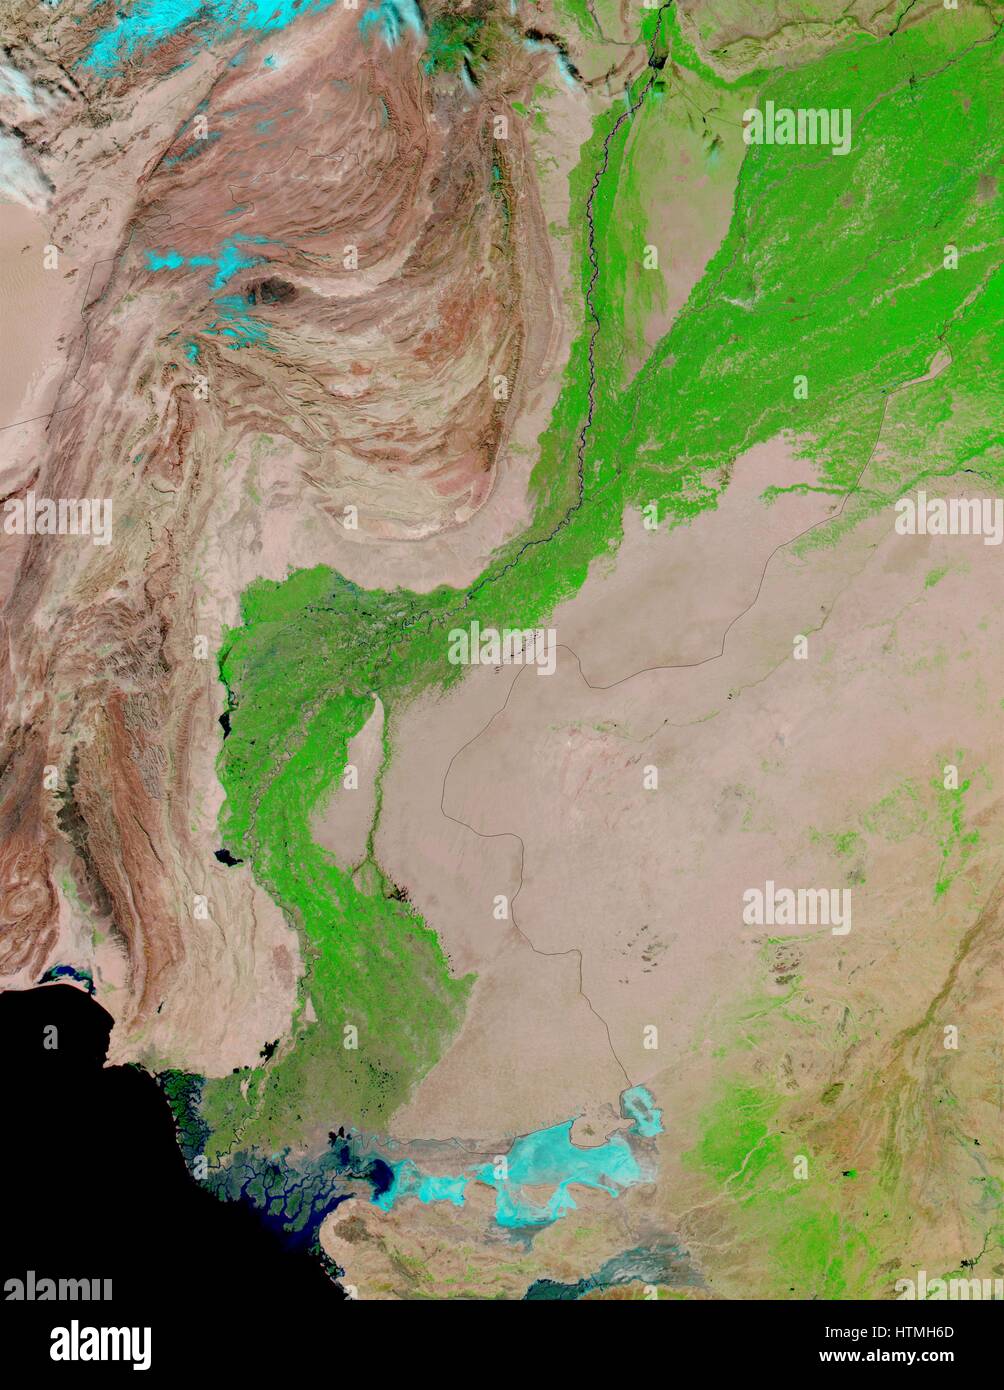 false-colour images feature the Indus River Valley, a lush oasis of vegetation made possible by the Indus River, which is visible as a thin black thread heading toward the Arabian Sea in the false-colour image. Stock Photo